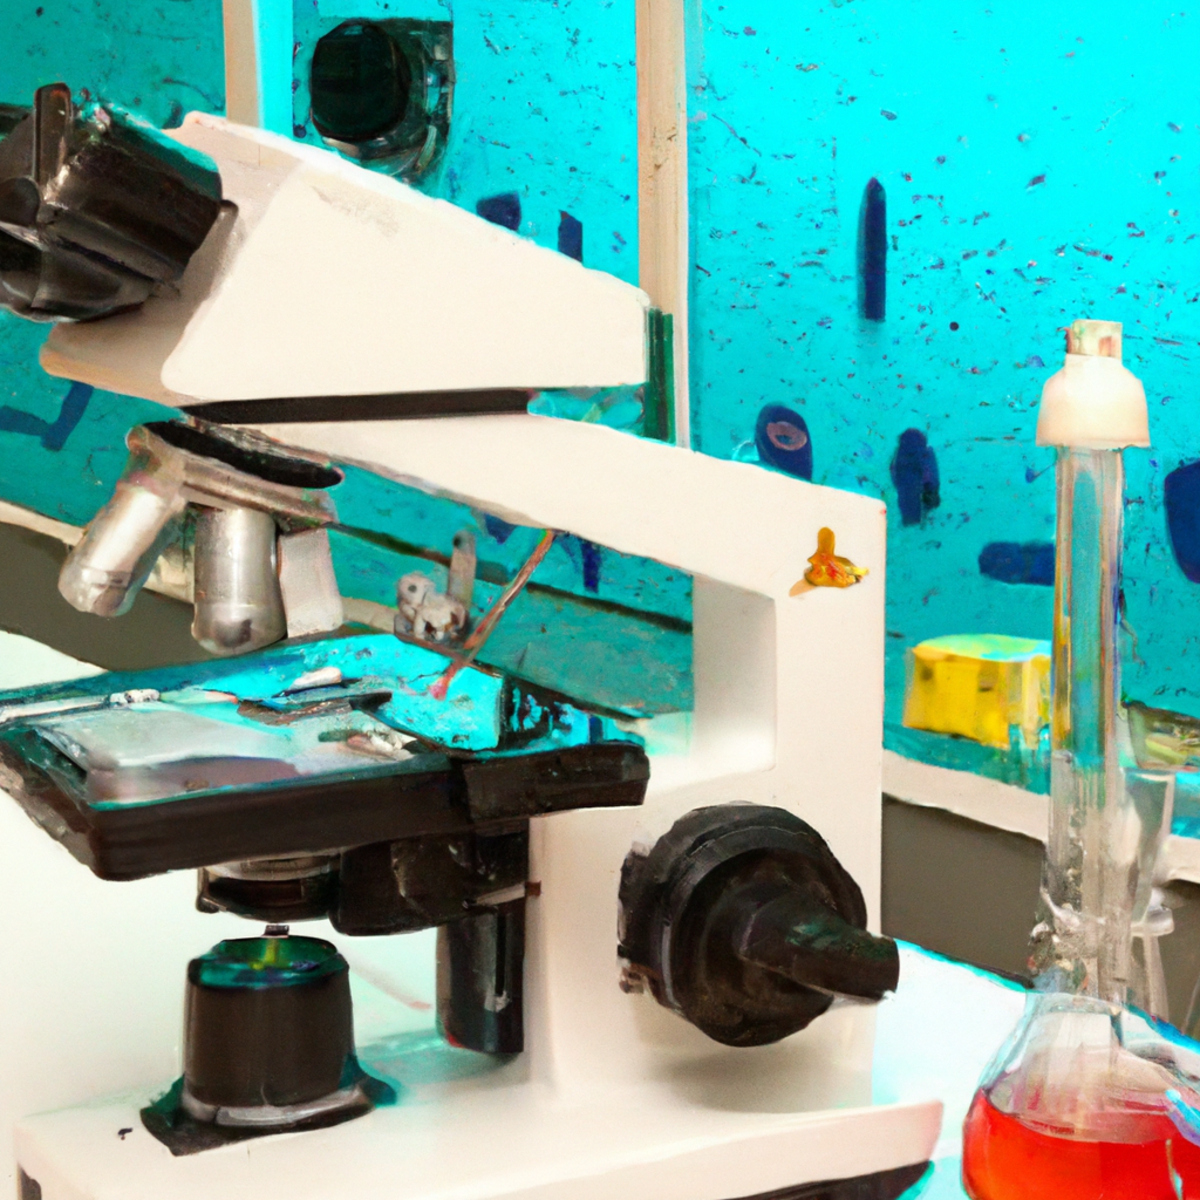 Lab bench with microscope, glassware, and bright lights, emphasizing precision in studying Creutzfeldt-Jakob Disease and prion proteins.